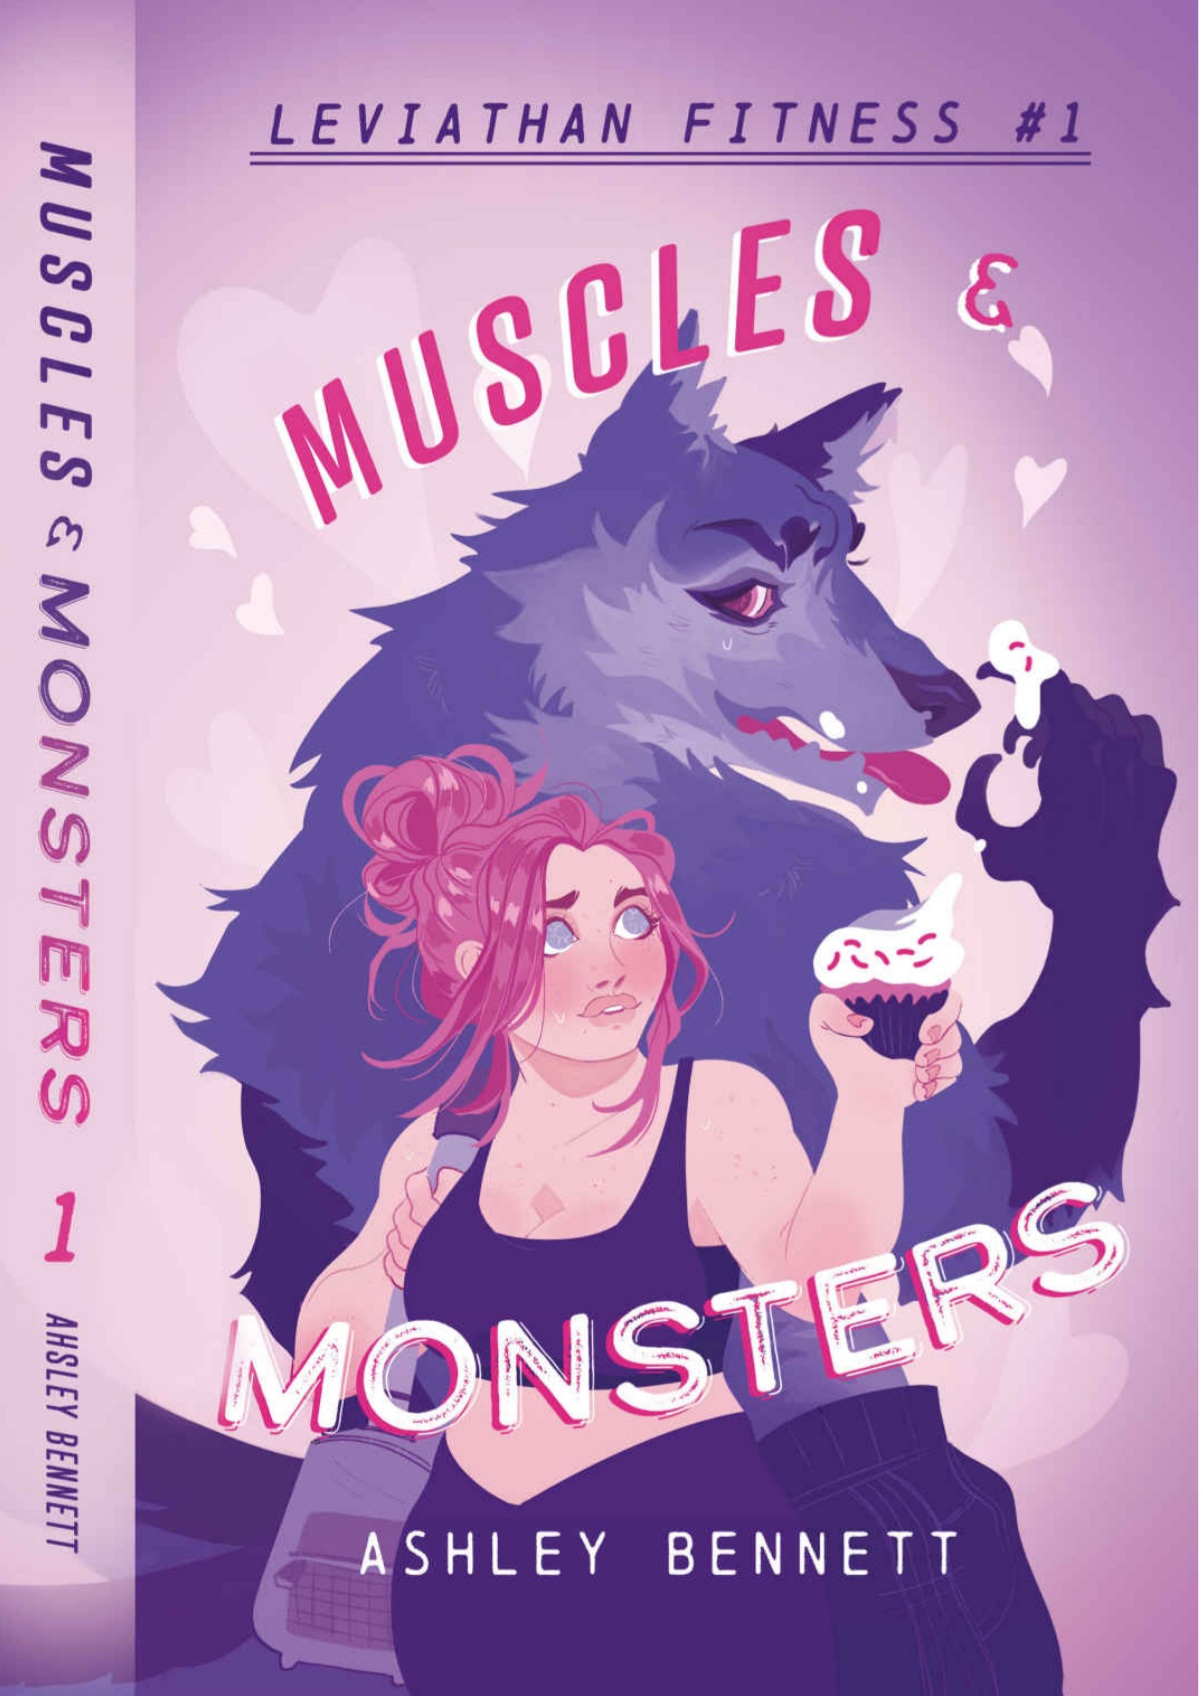 Muscles & Monsters (Leviathan Fitness #1) Free Download